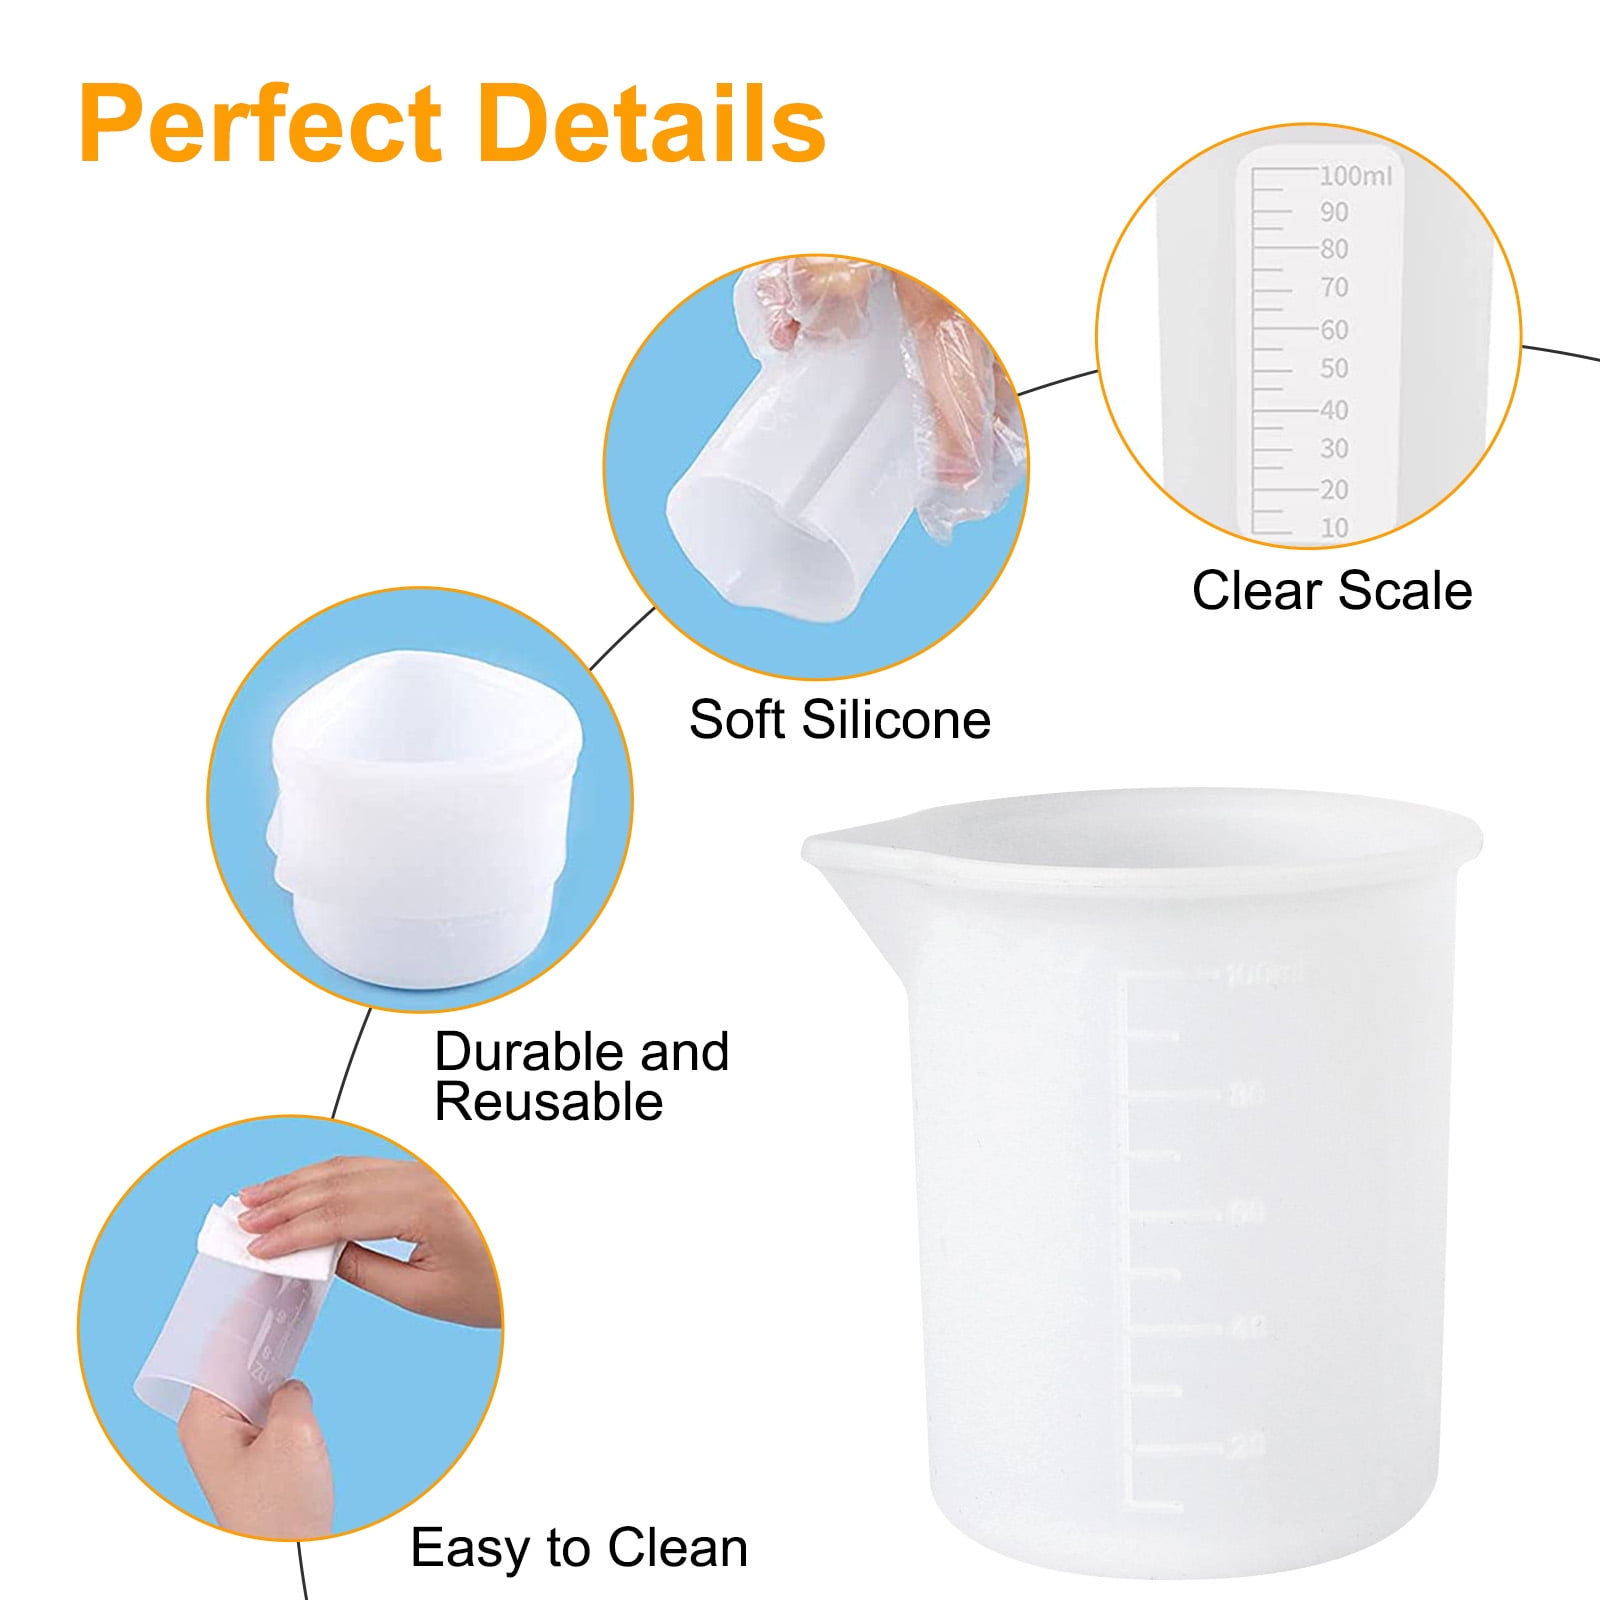 Generic Silicone Measuring Cups for Epoxy Resin,Resin Supplies with  250&100Ml Silicone Cups for Resin,Molds,Jewelry Making @ Best Price Online